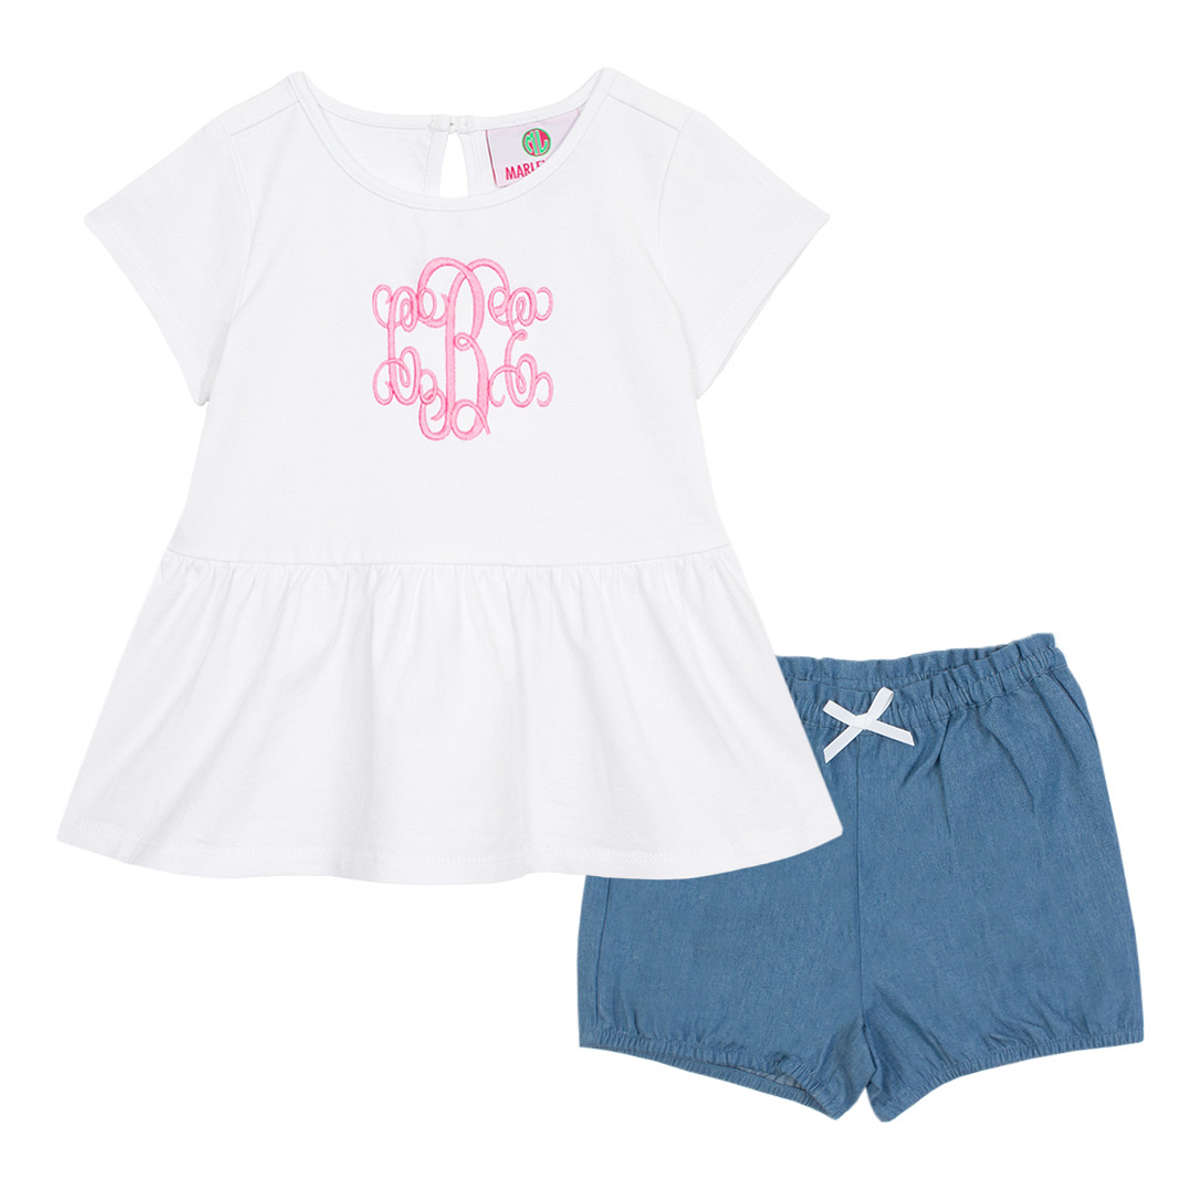 Personalized Girl's Peplum Top with Shorts - Marleylilly Kids